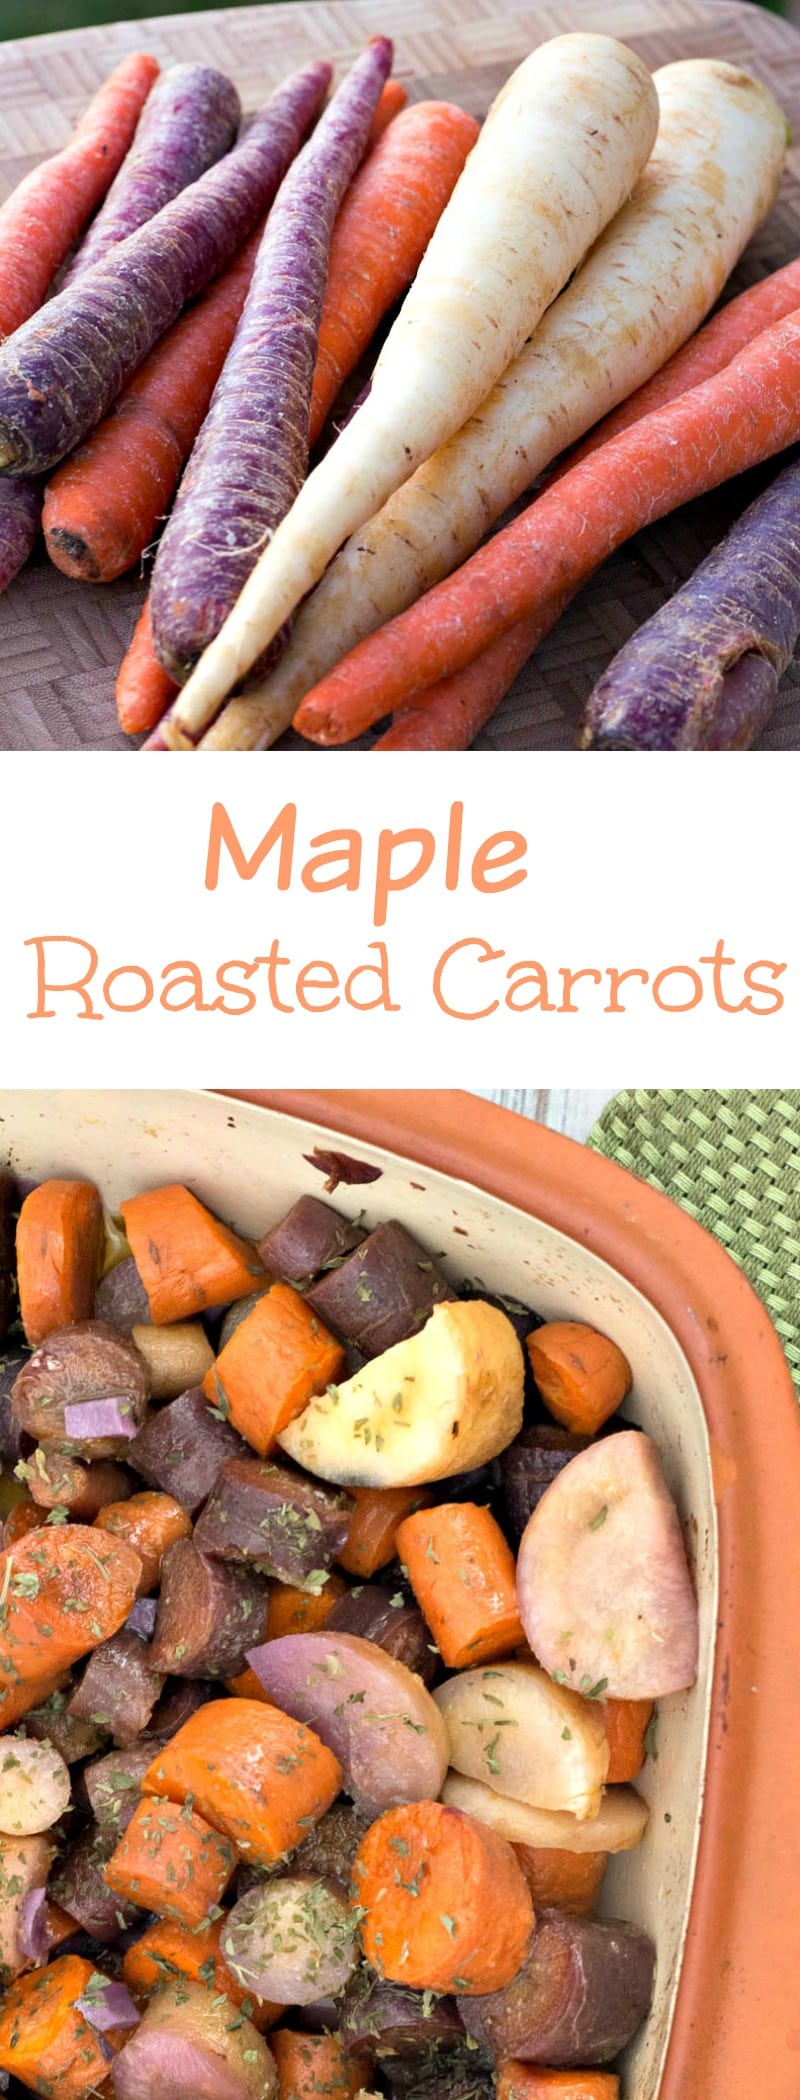 Maple Roasted Carrots - a simple side dish made by roasting carrots and garlic and tossing them in maple syrup. Perfect side for Thanksgiving.